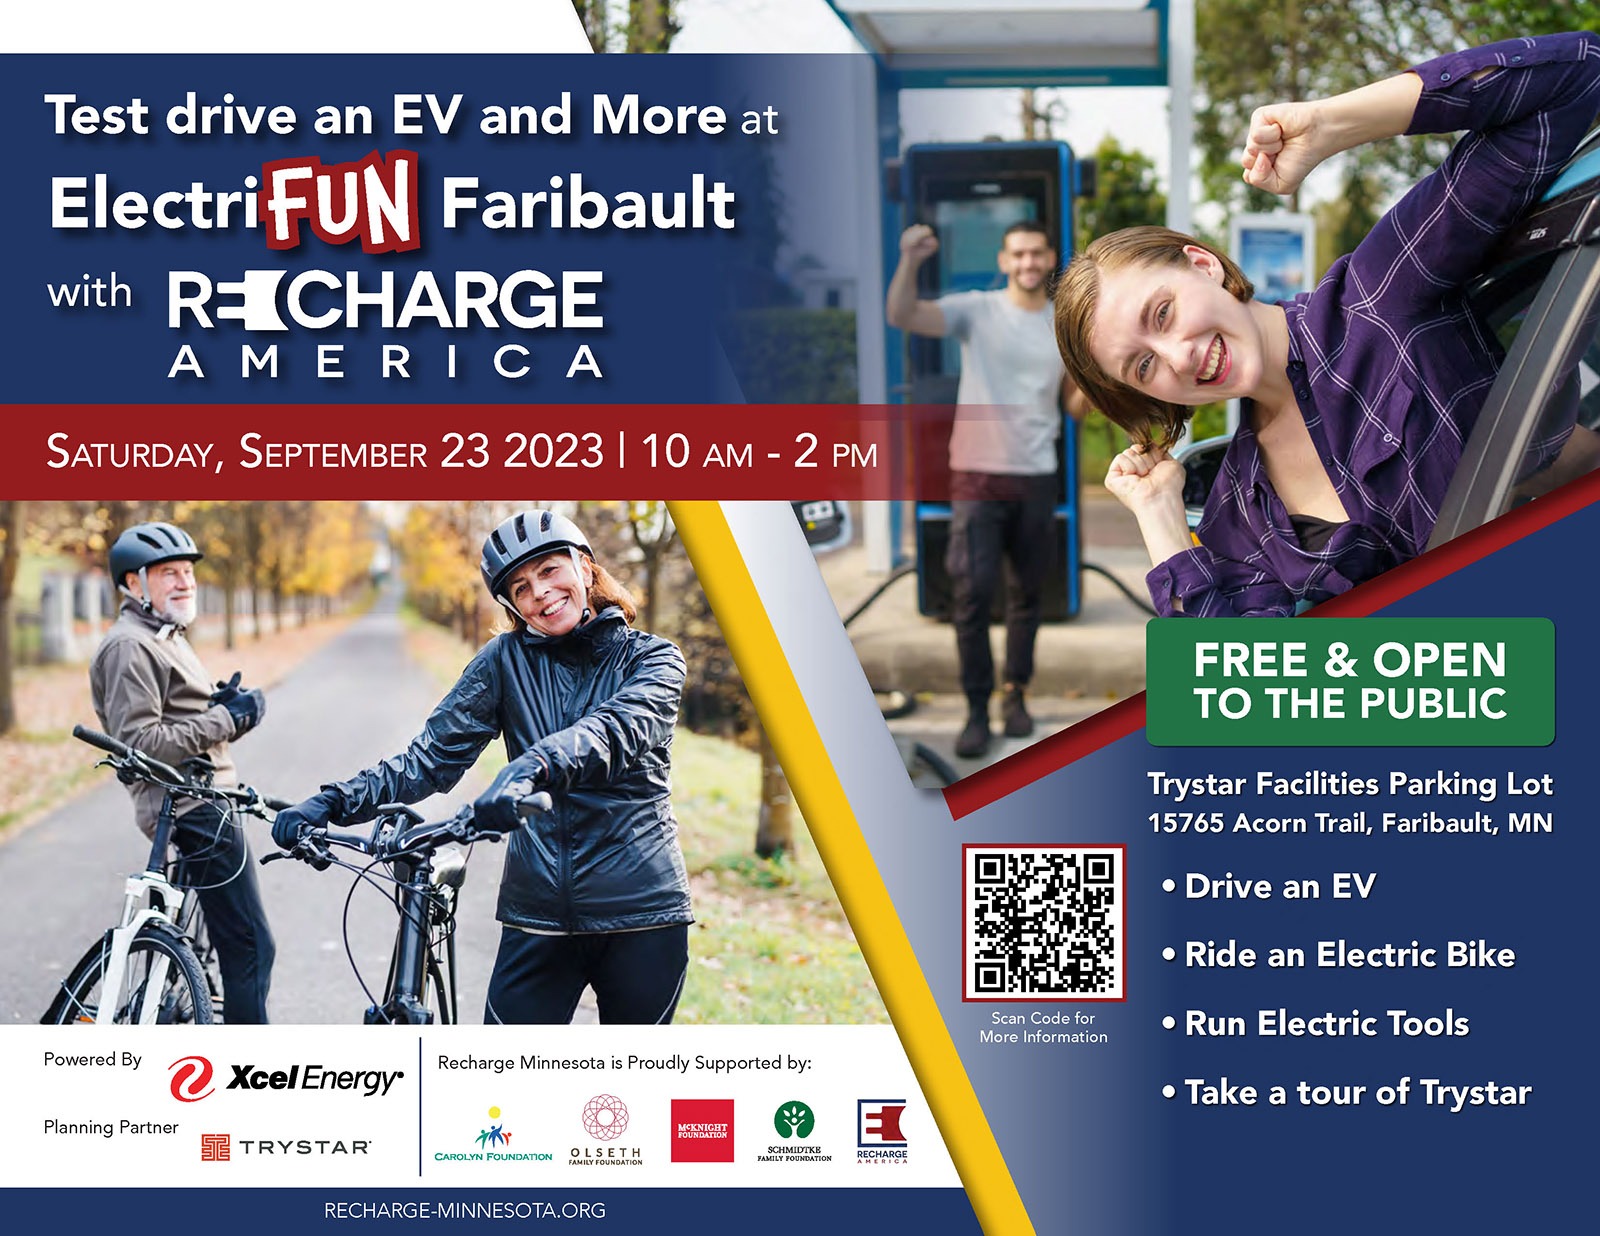 Flyer for an event from 2023 in Faribault, Minnesota. Image of two mature smiling adults, one woman and one man, on electric bikes. Another image of a young woman leaning out of a car and a young man behind her charging an electric vehicle.